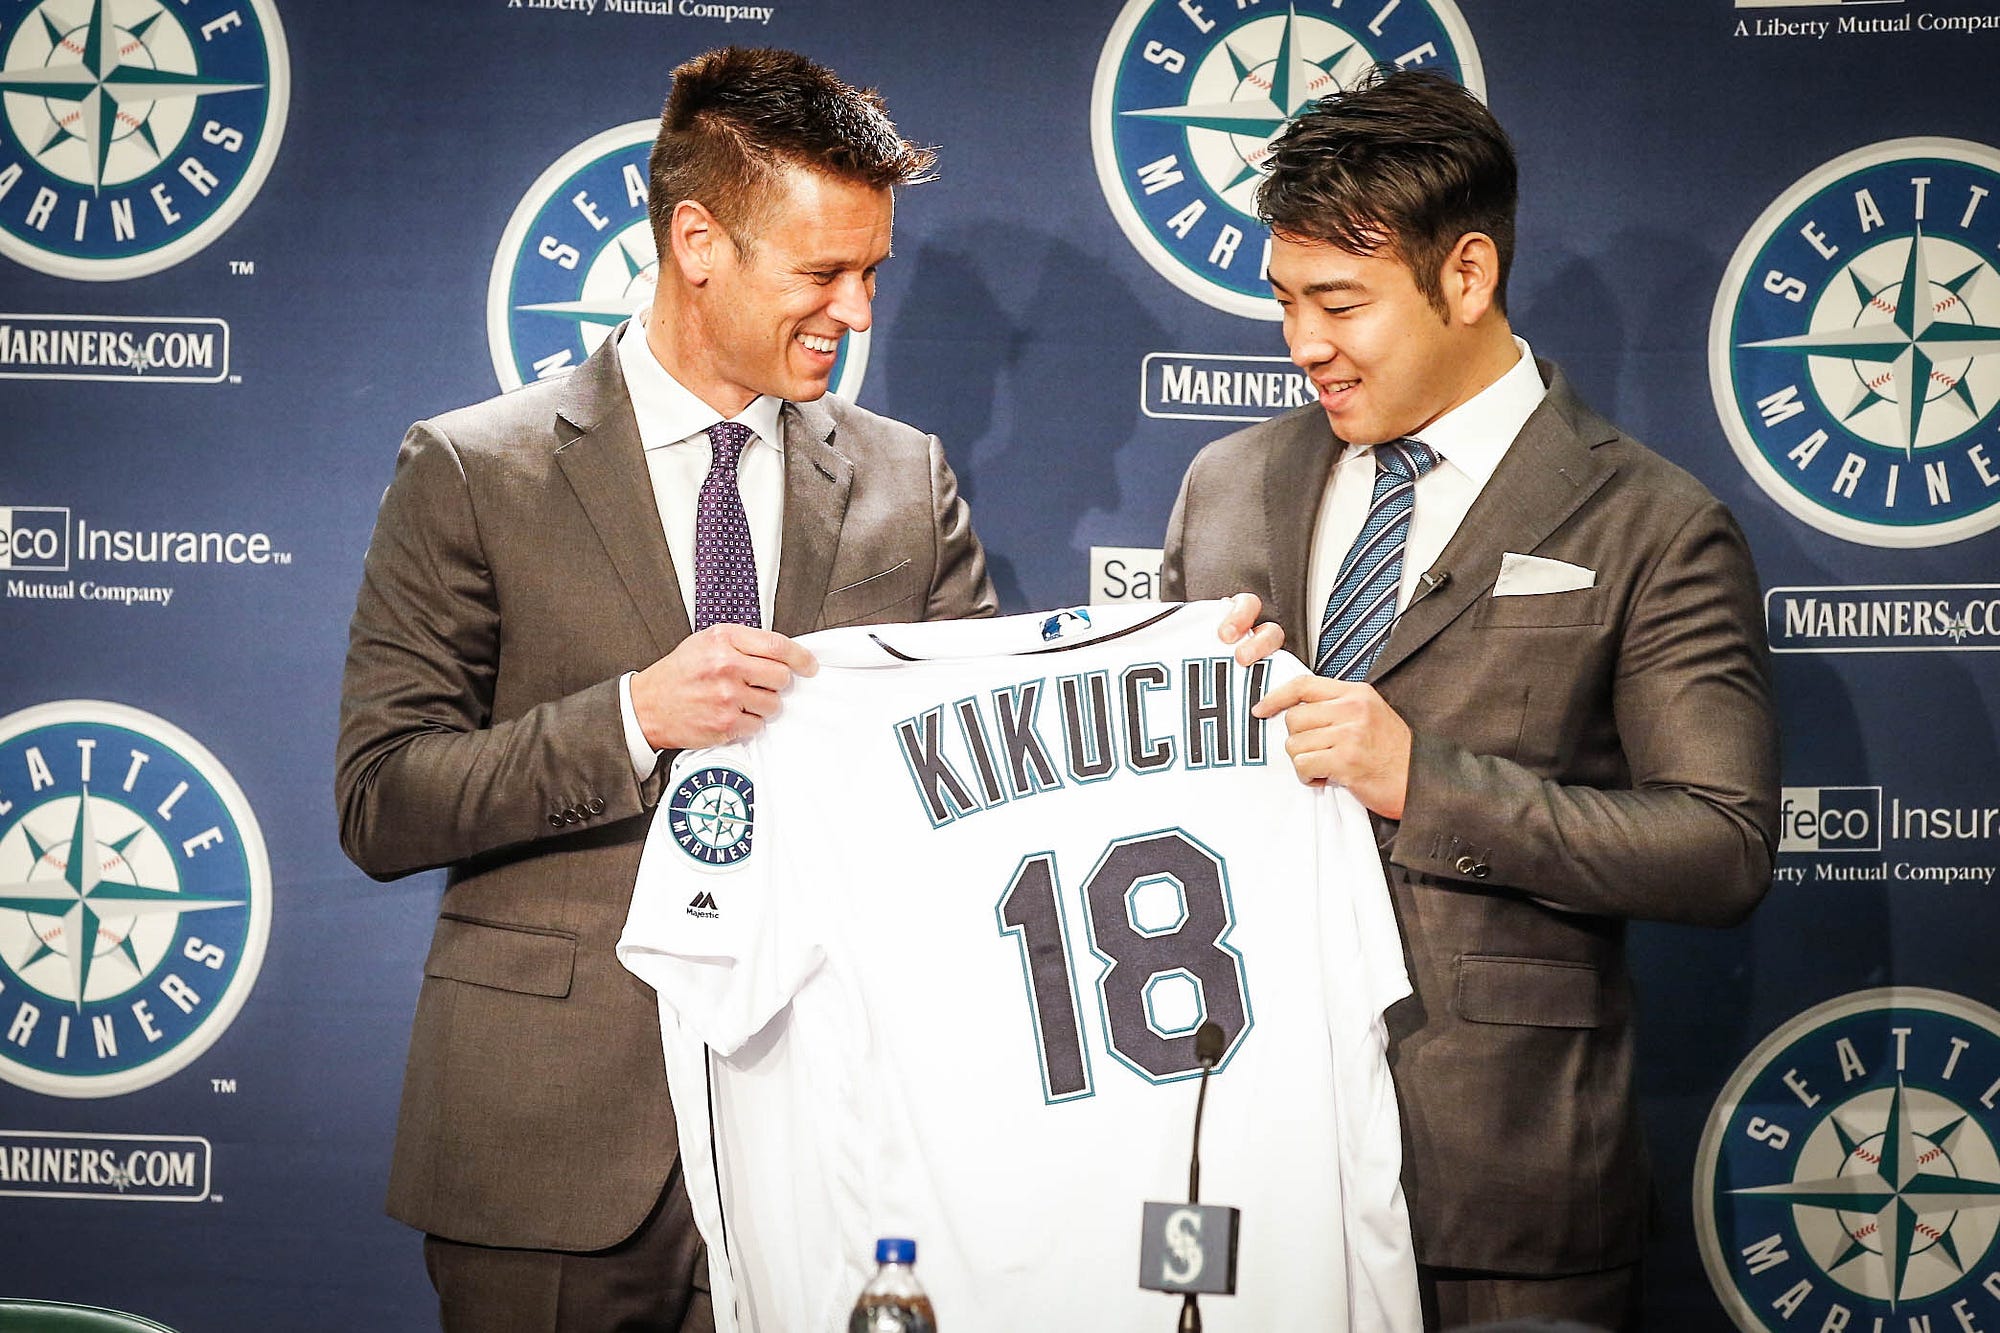 Yusei Kikuchi came ready for this moment, by Colin O'Keefe